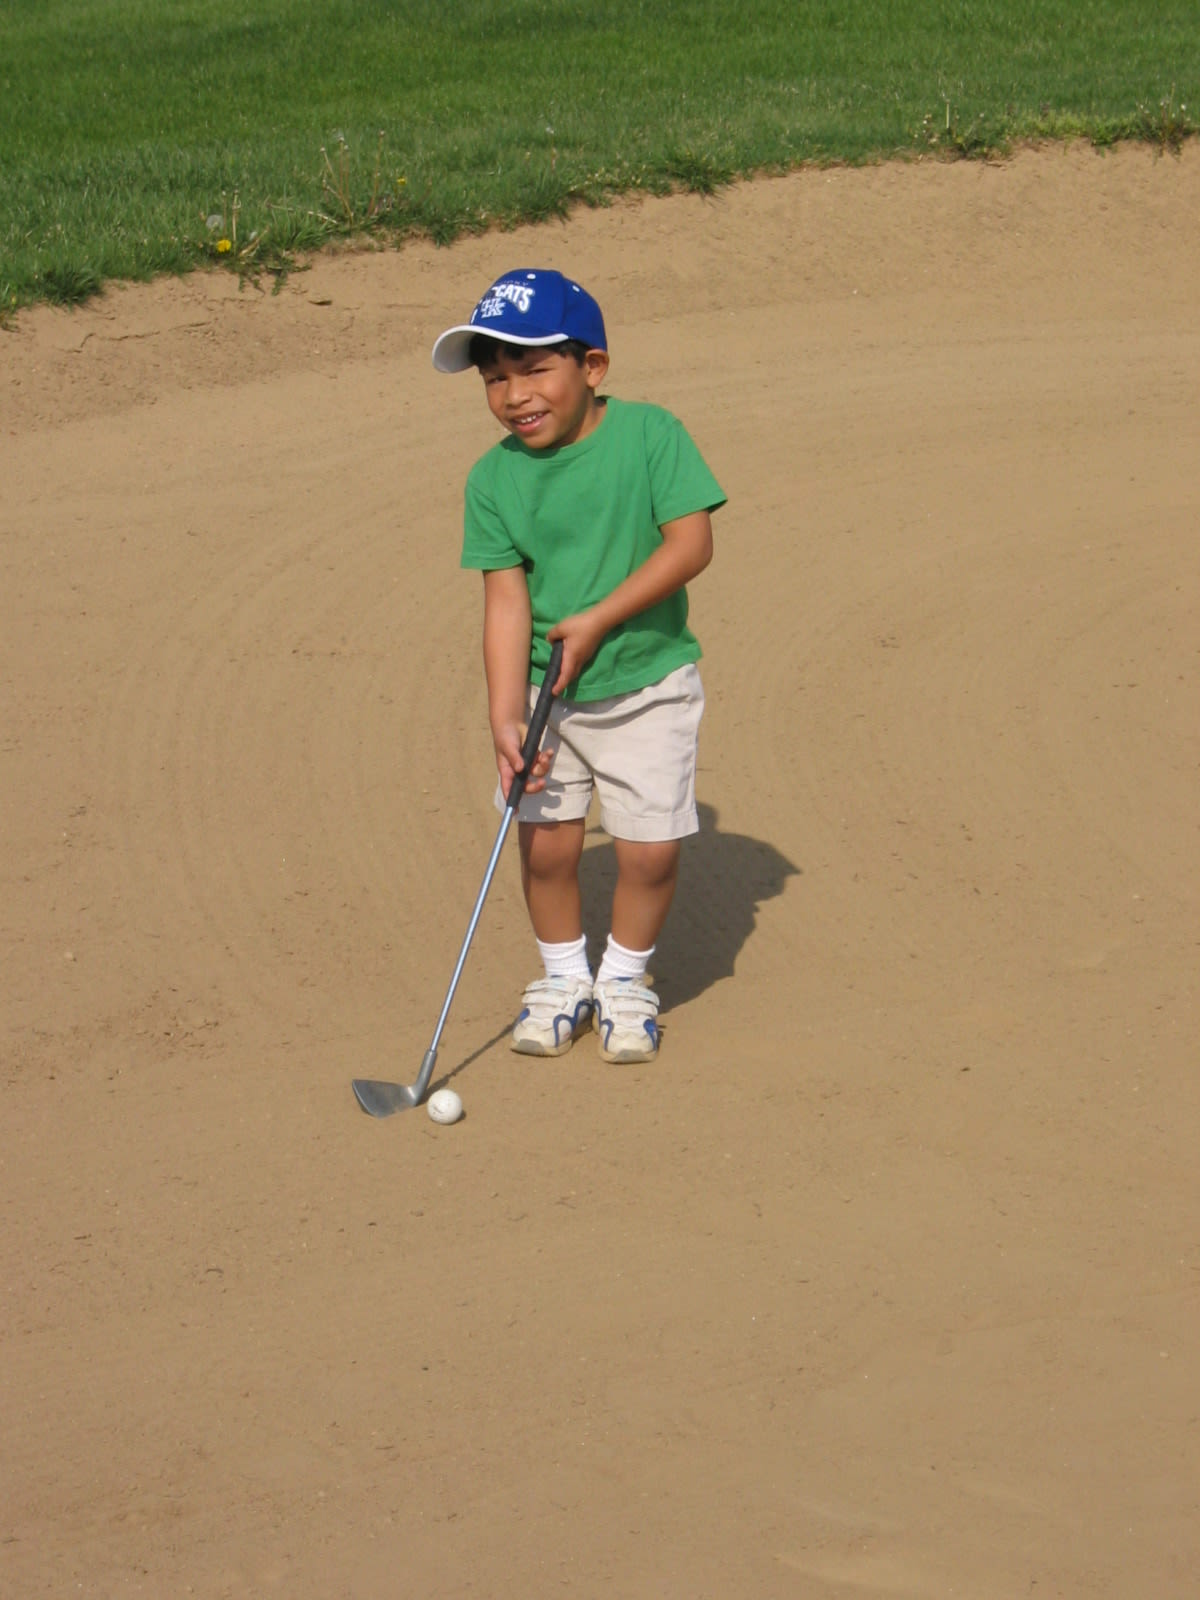 Originally from Guatemala, Howard's first golf experience was with his dad, Joe, at a local par 3 course in Kentucky.